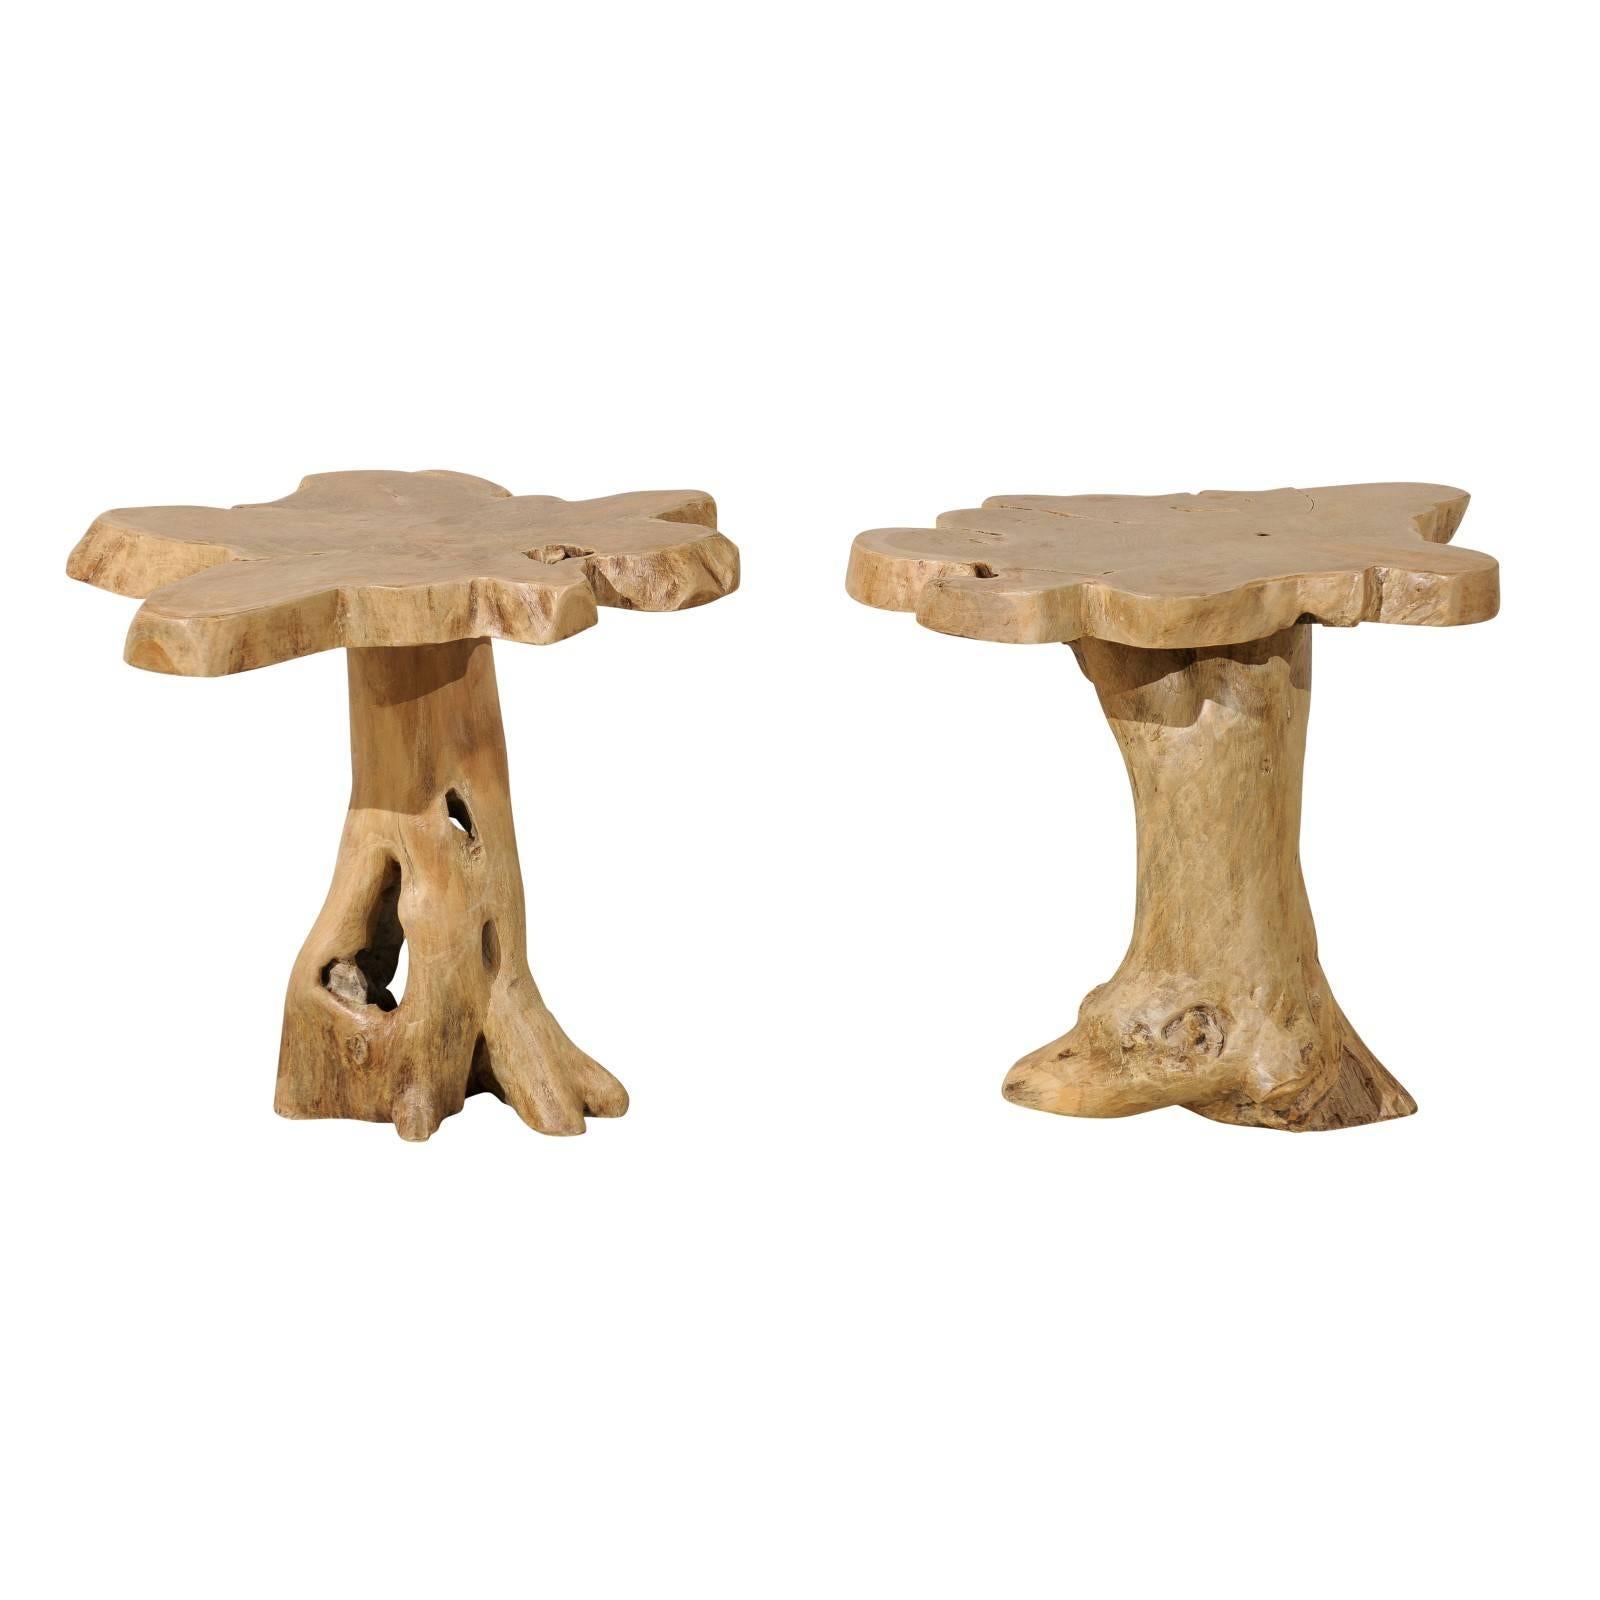 Pair of Teak Root Drink or Side Tables with Natural Finish from India, Tan Color